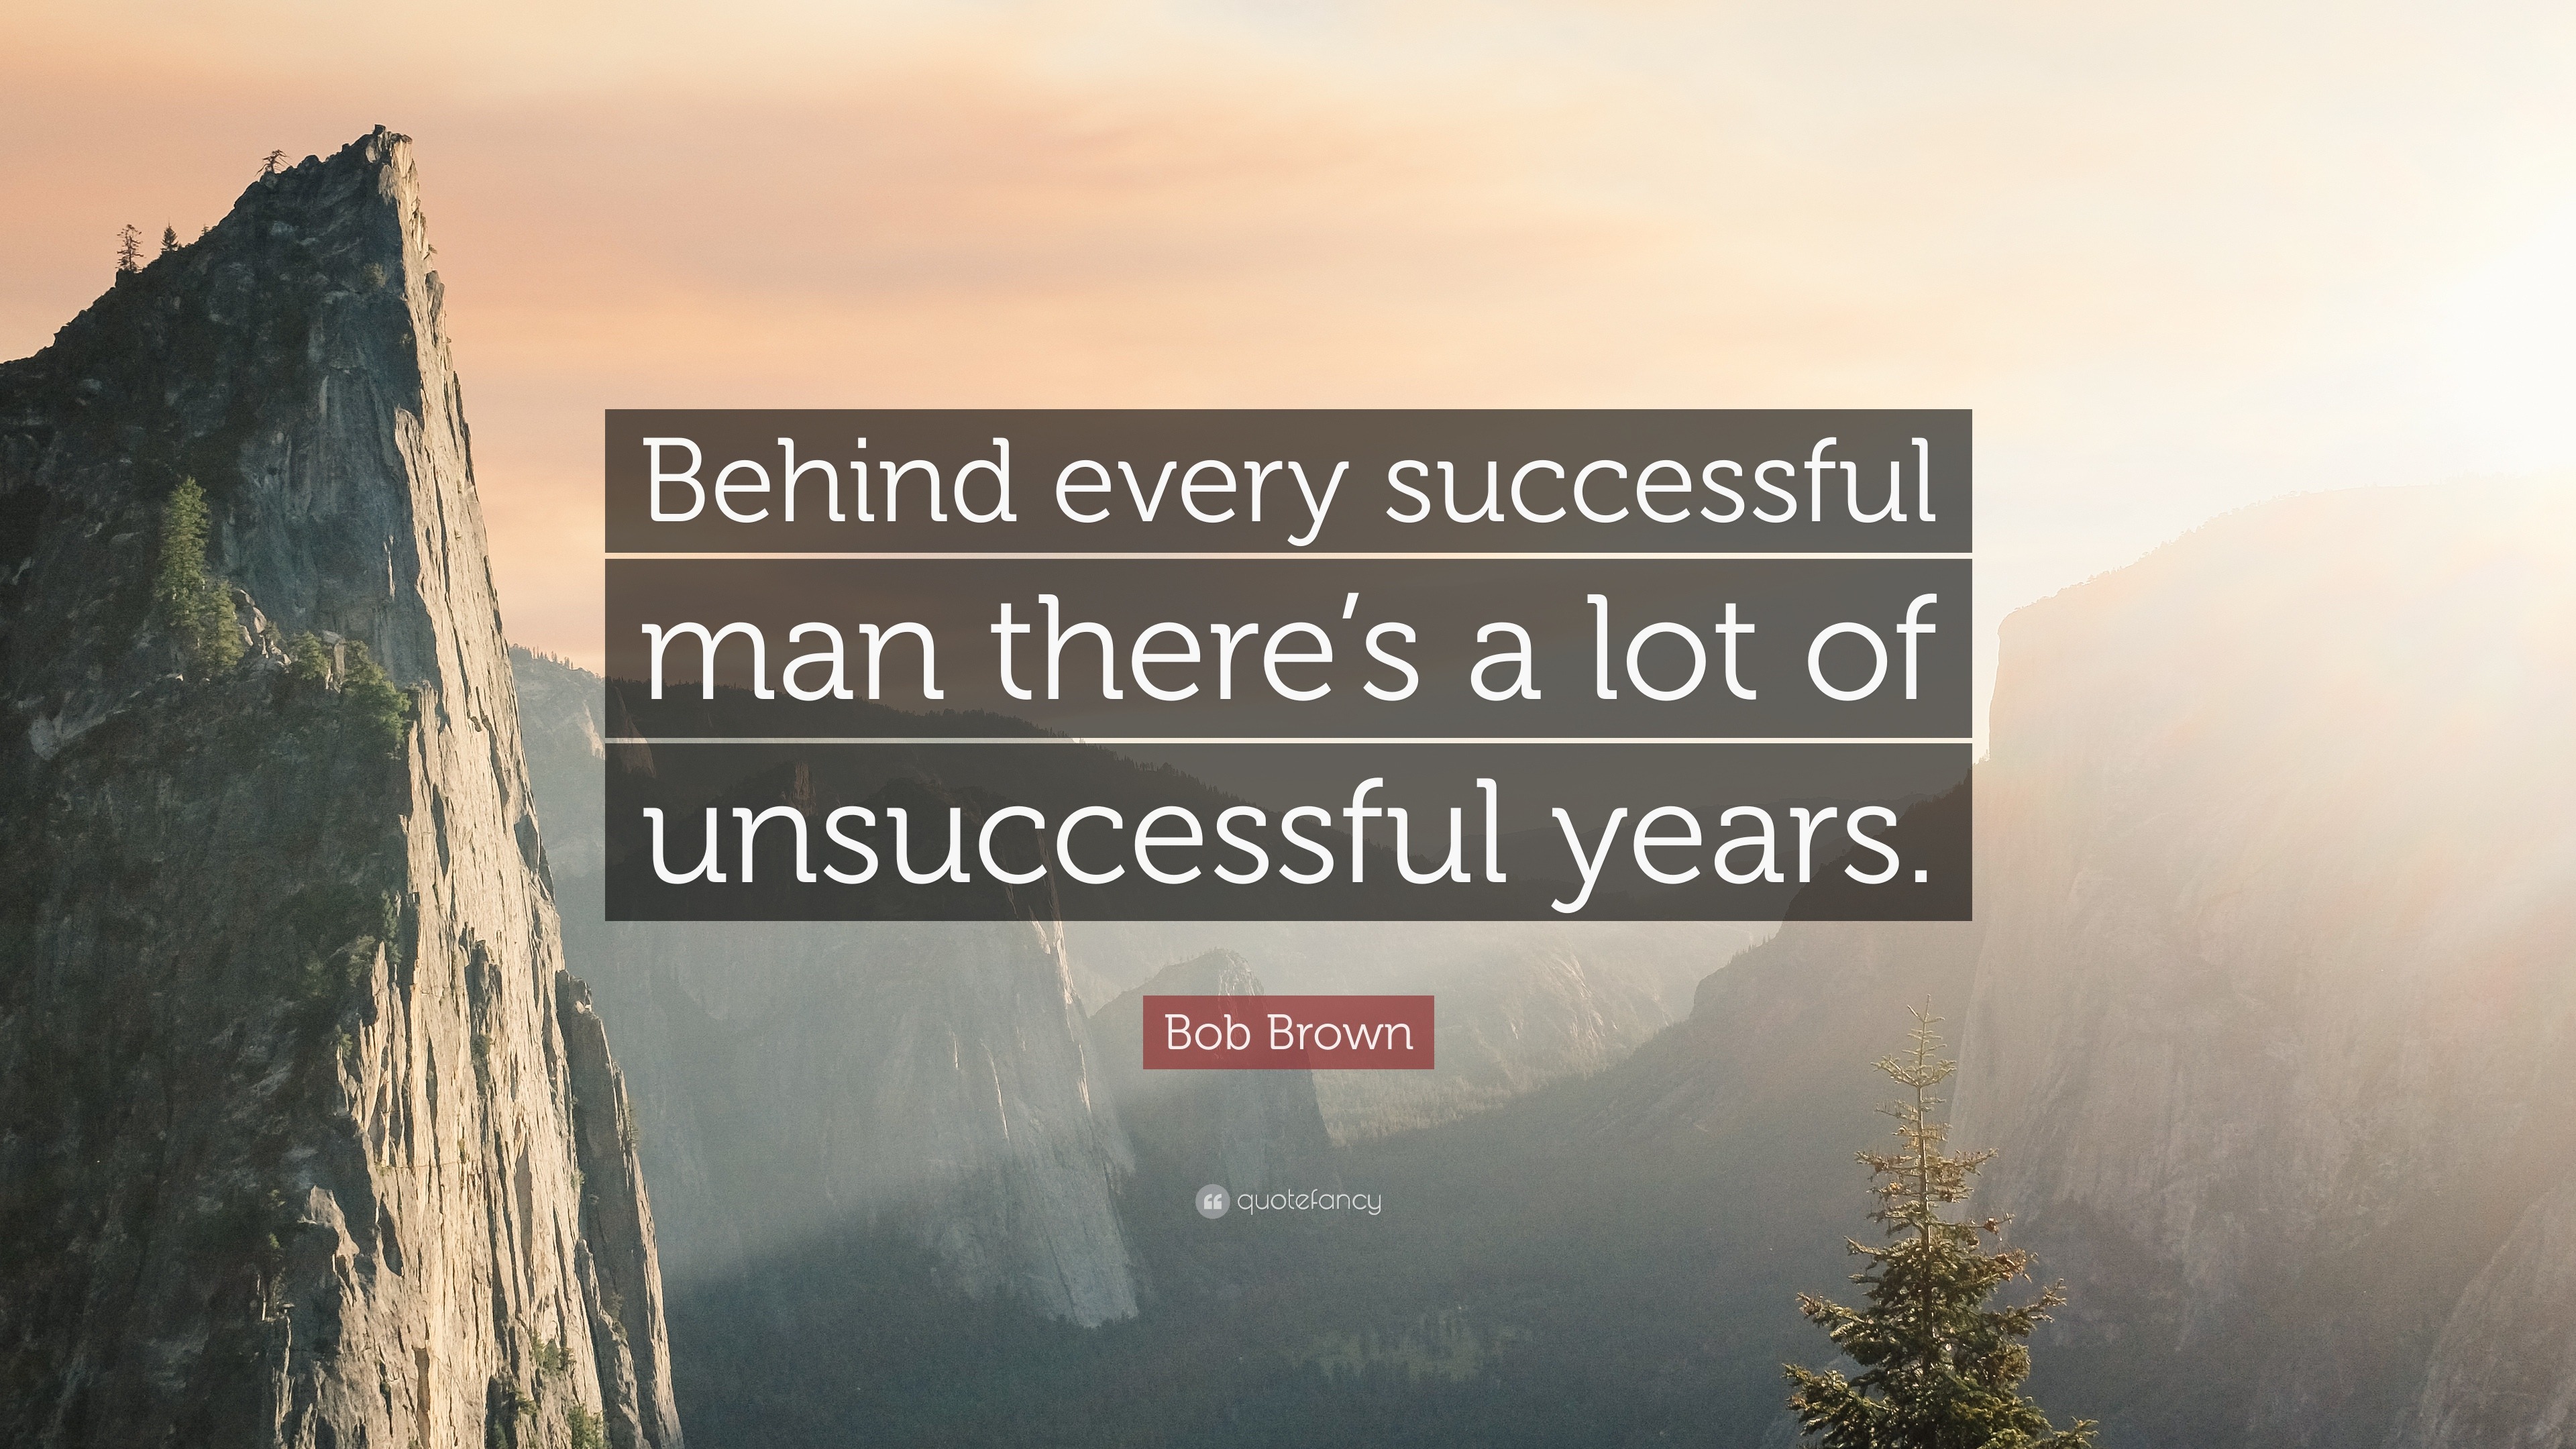 Bob Brown Quote Behind Every Successful Man There S A Lot Of Unsuccessful Years